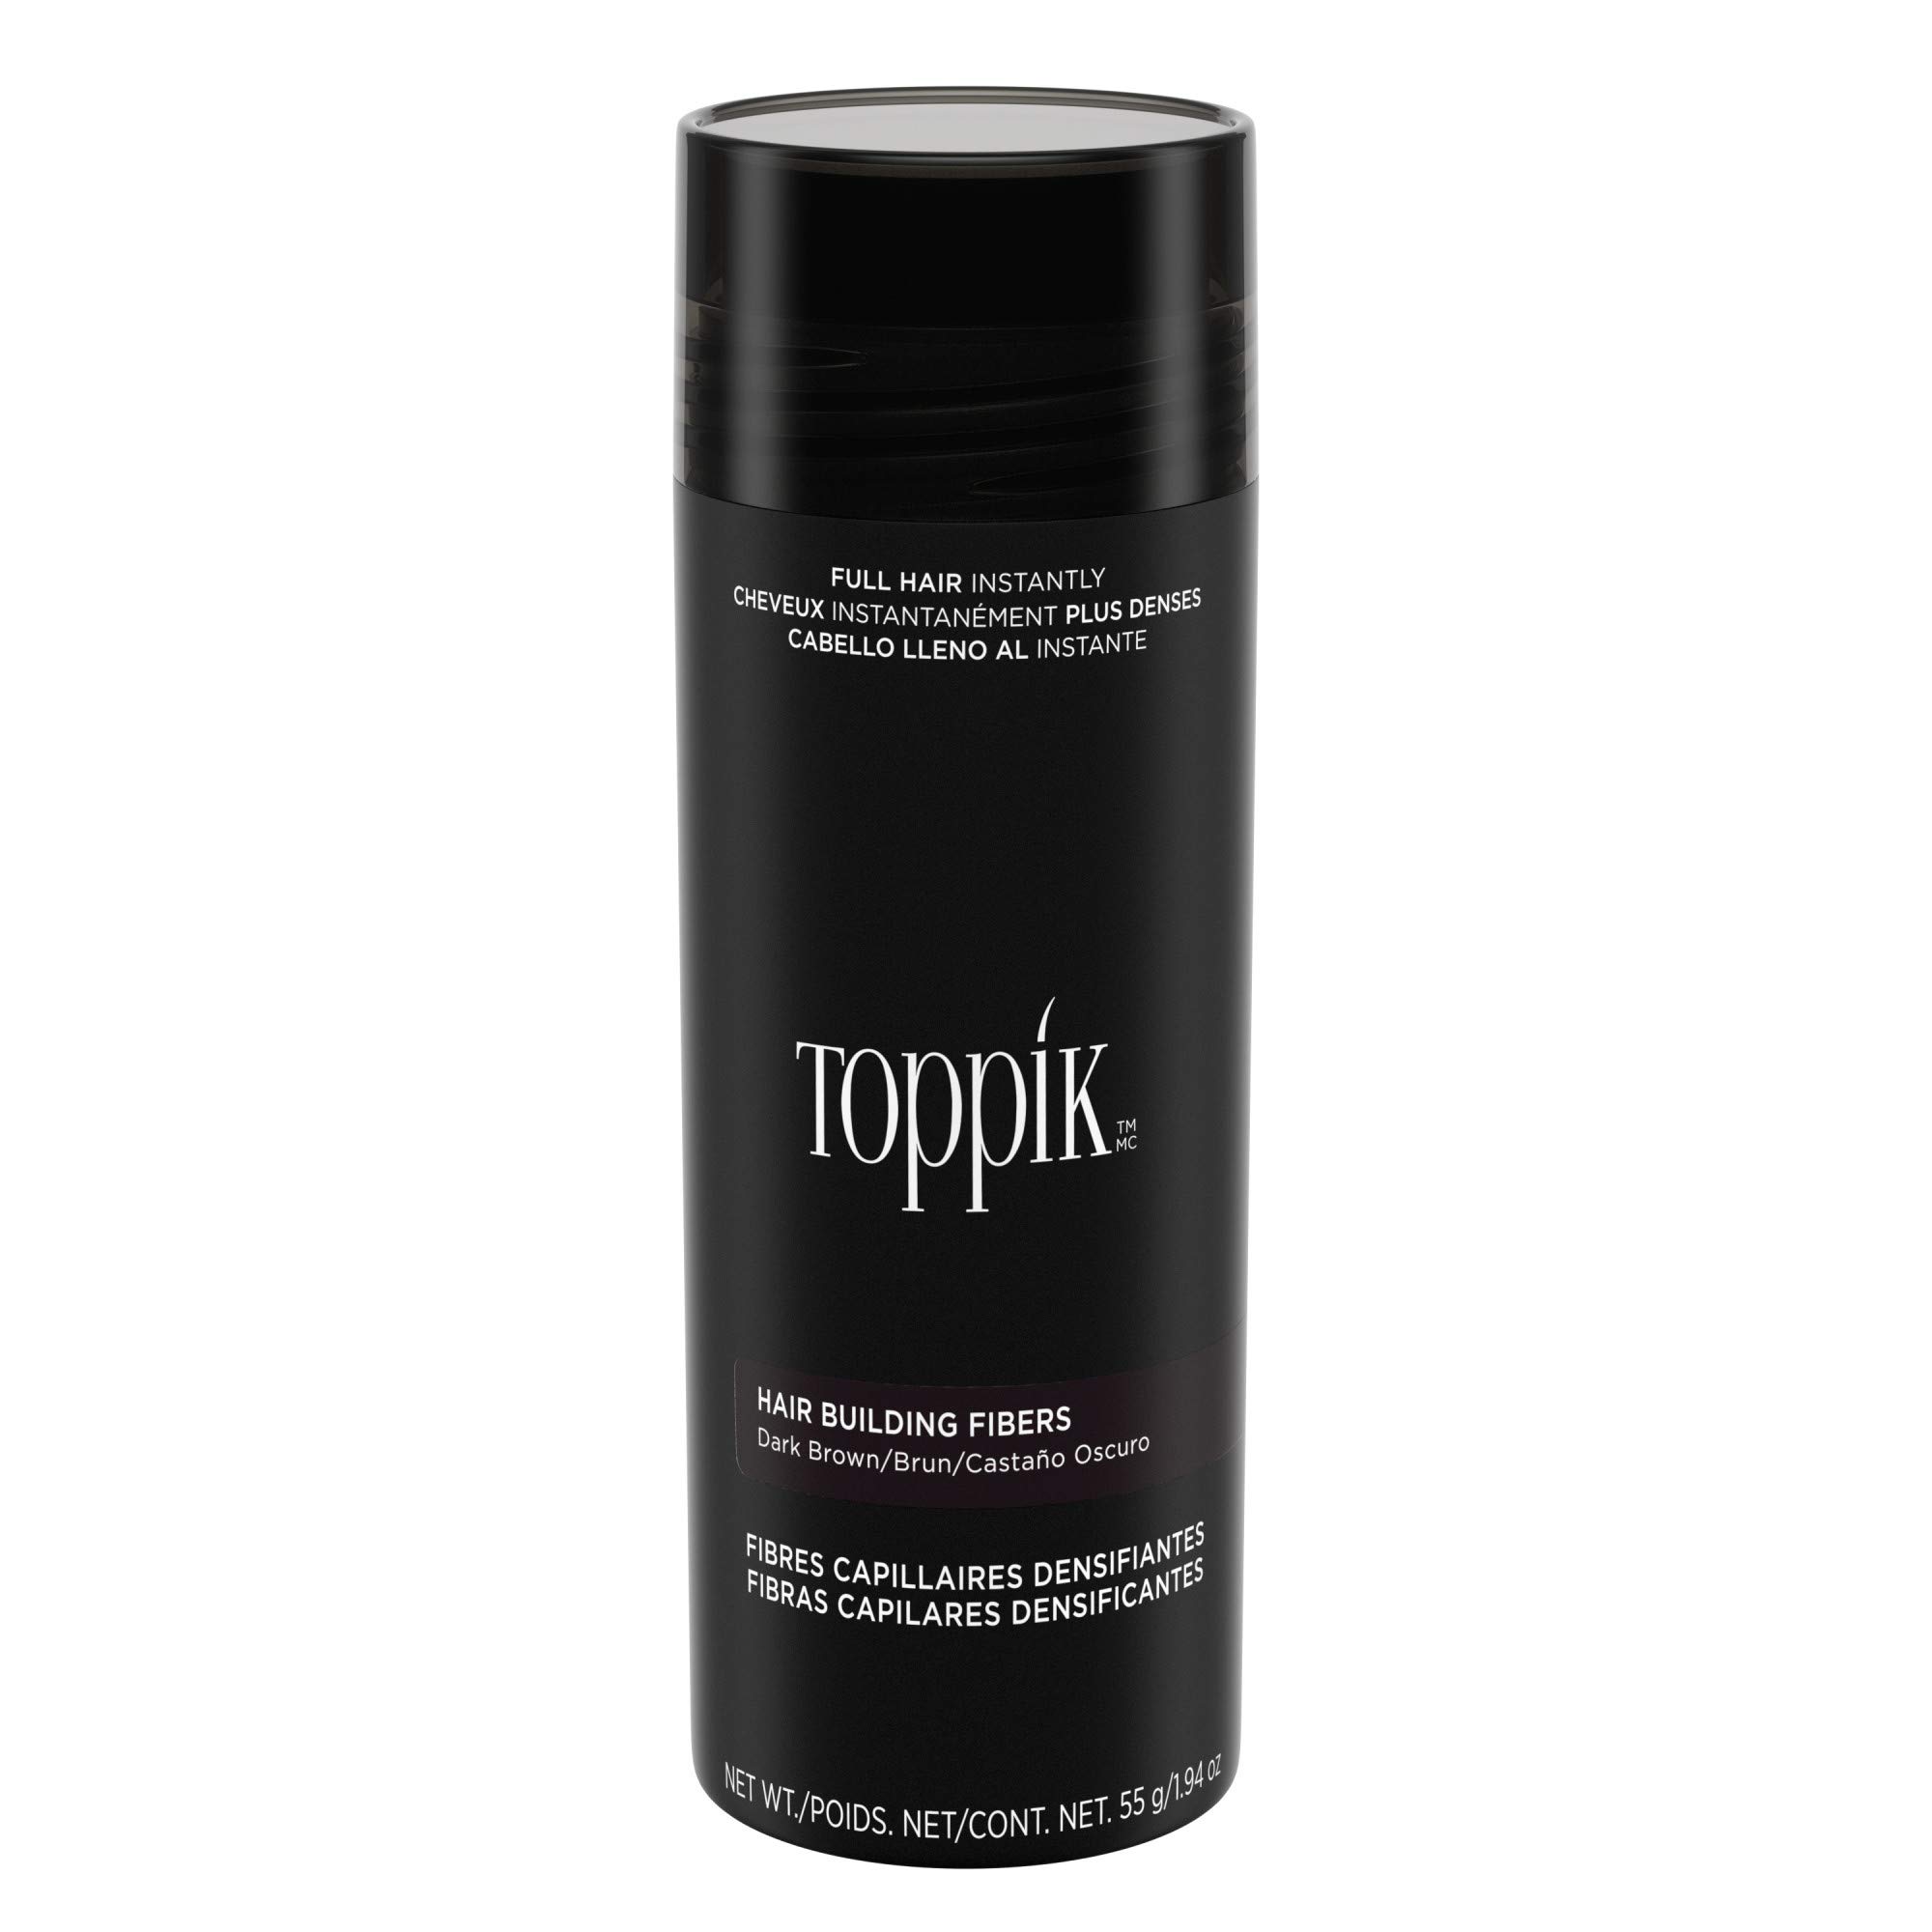 Toppik Hair Building Fibers, White, 55g | Fill In Fine or Thinning Hair | Instantly Thicker, Fuller Looking Hair | 9 Shades for Men Women